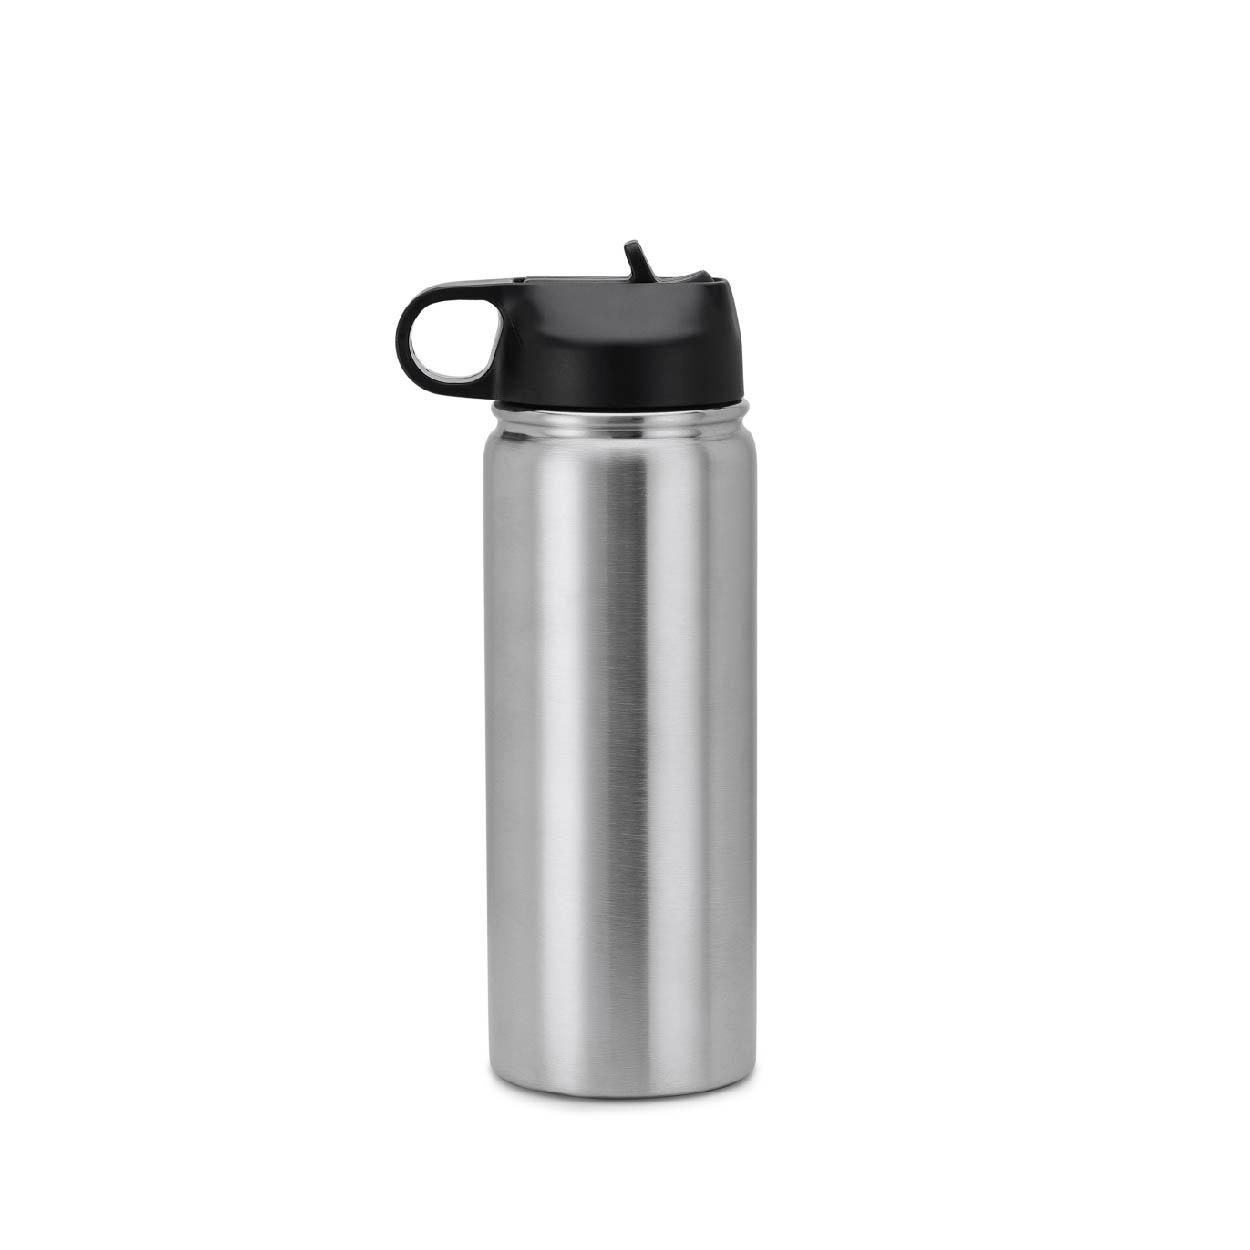 18oz Insulated Bottle